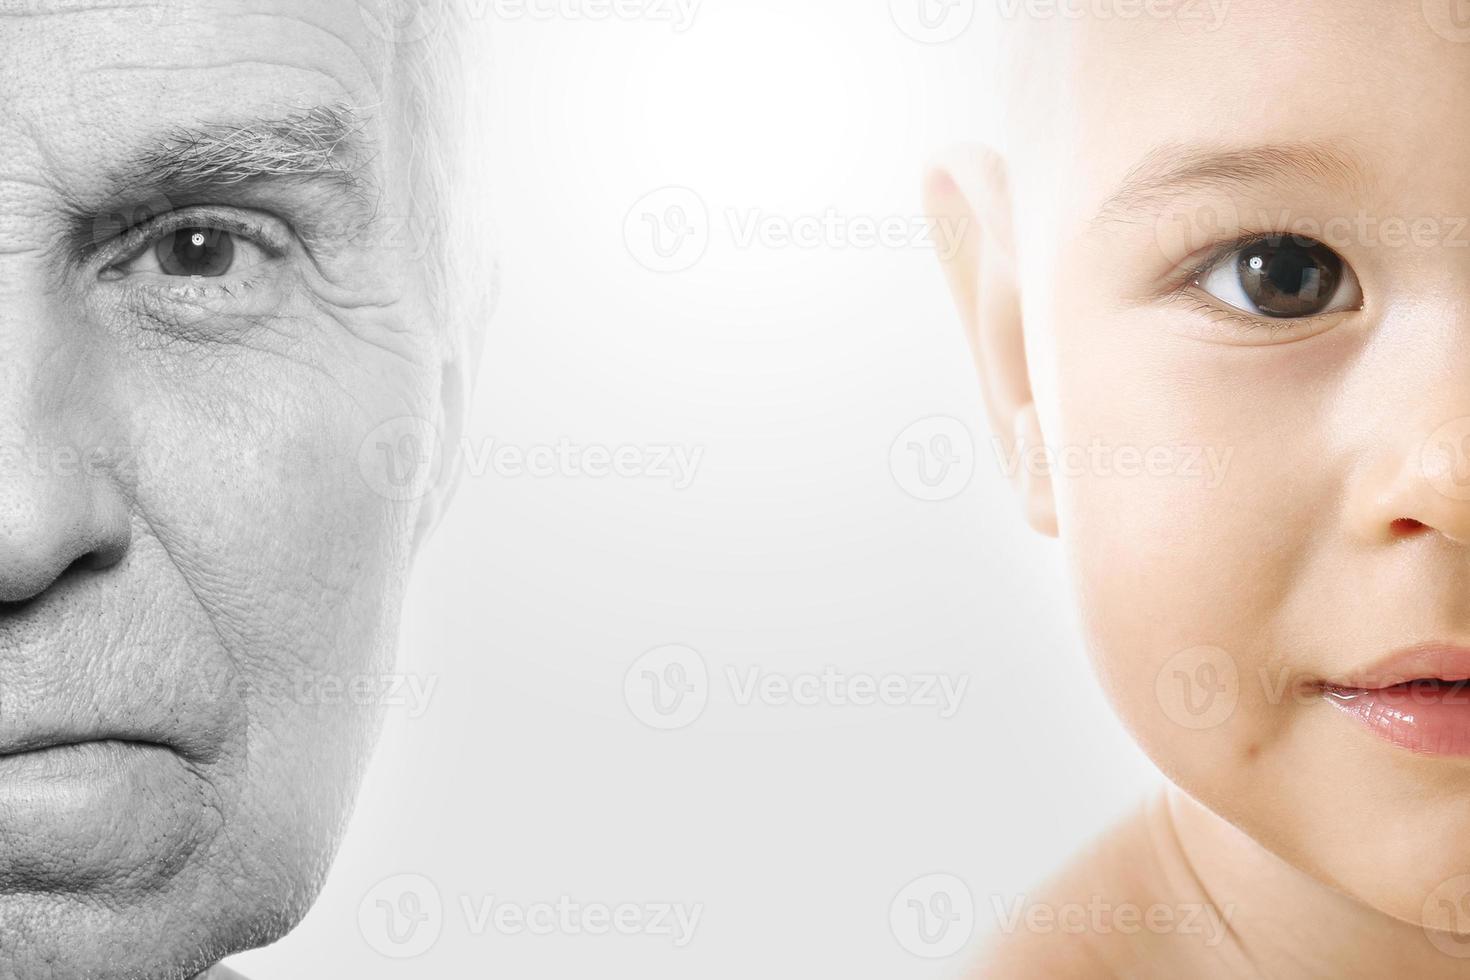 Elderly man and baby boy. Concept of rebirth and cycle of life. photo